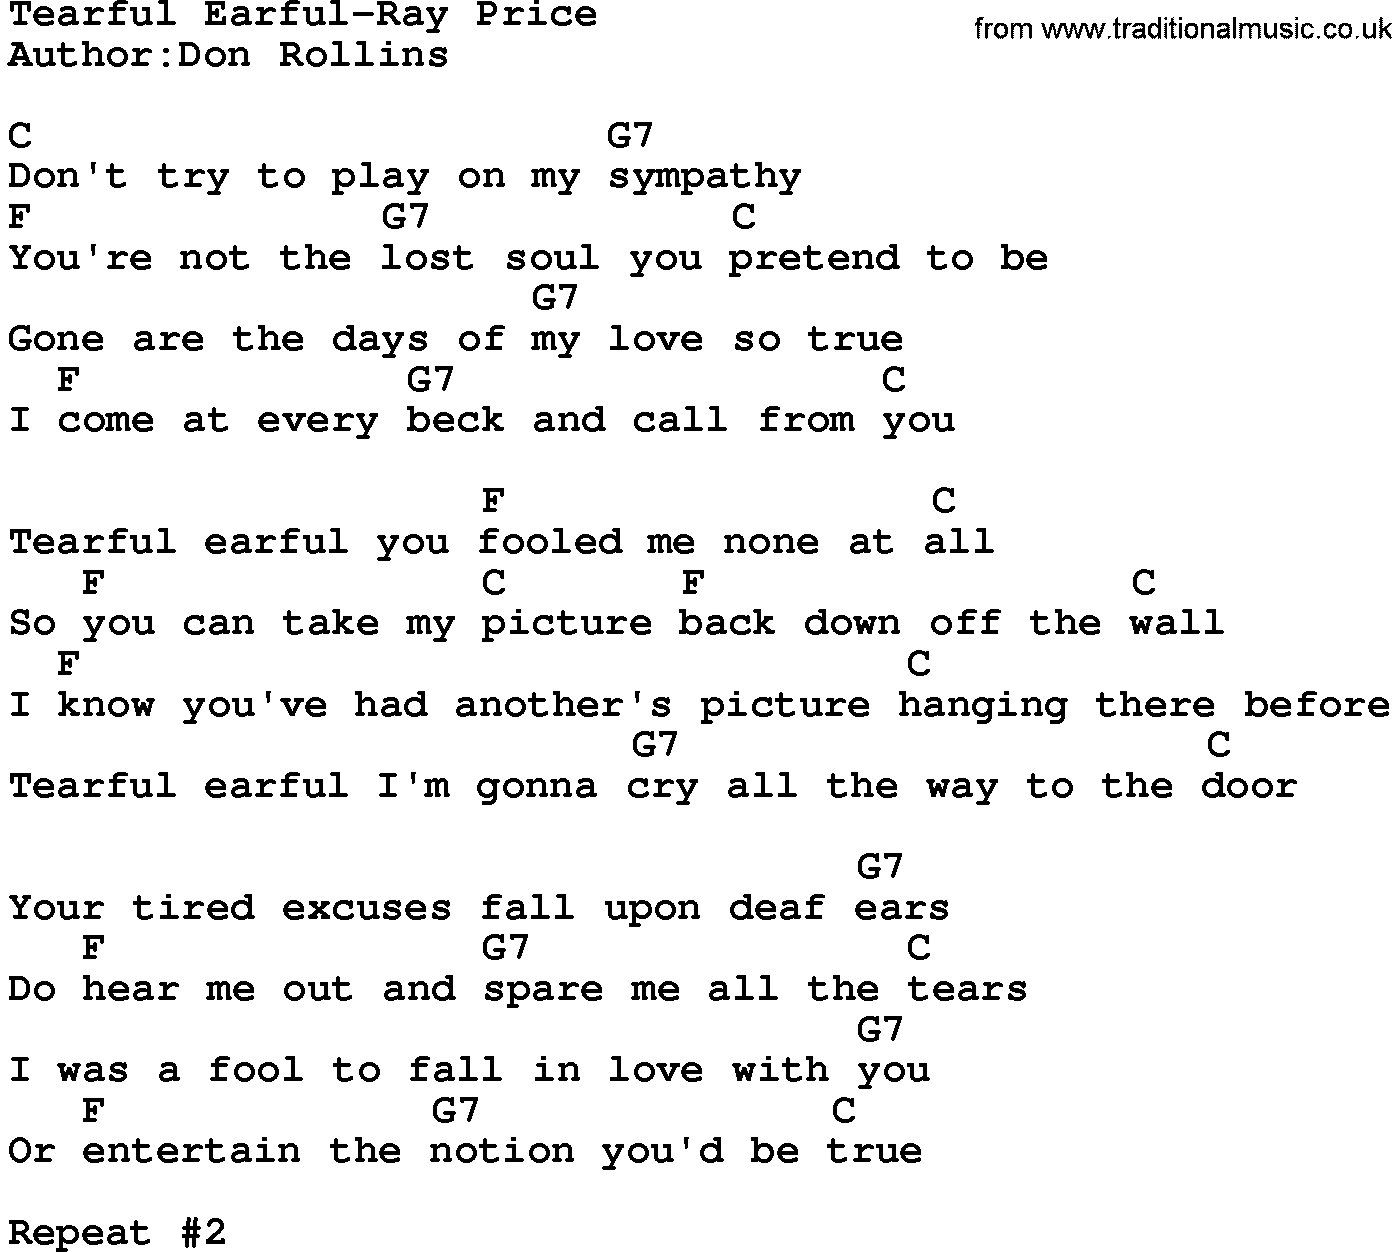 Country music song: Tearful Earful-Ray Price lyrics and chords